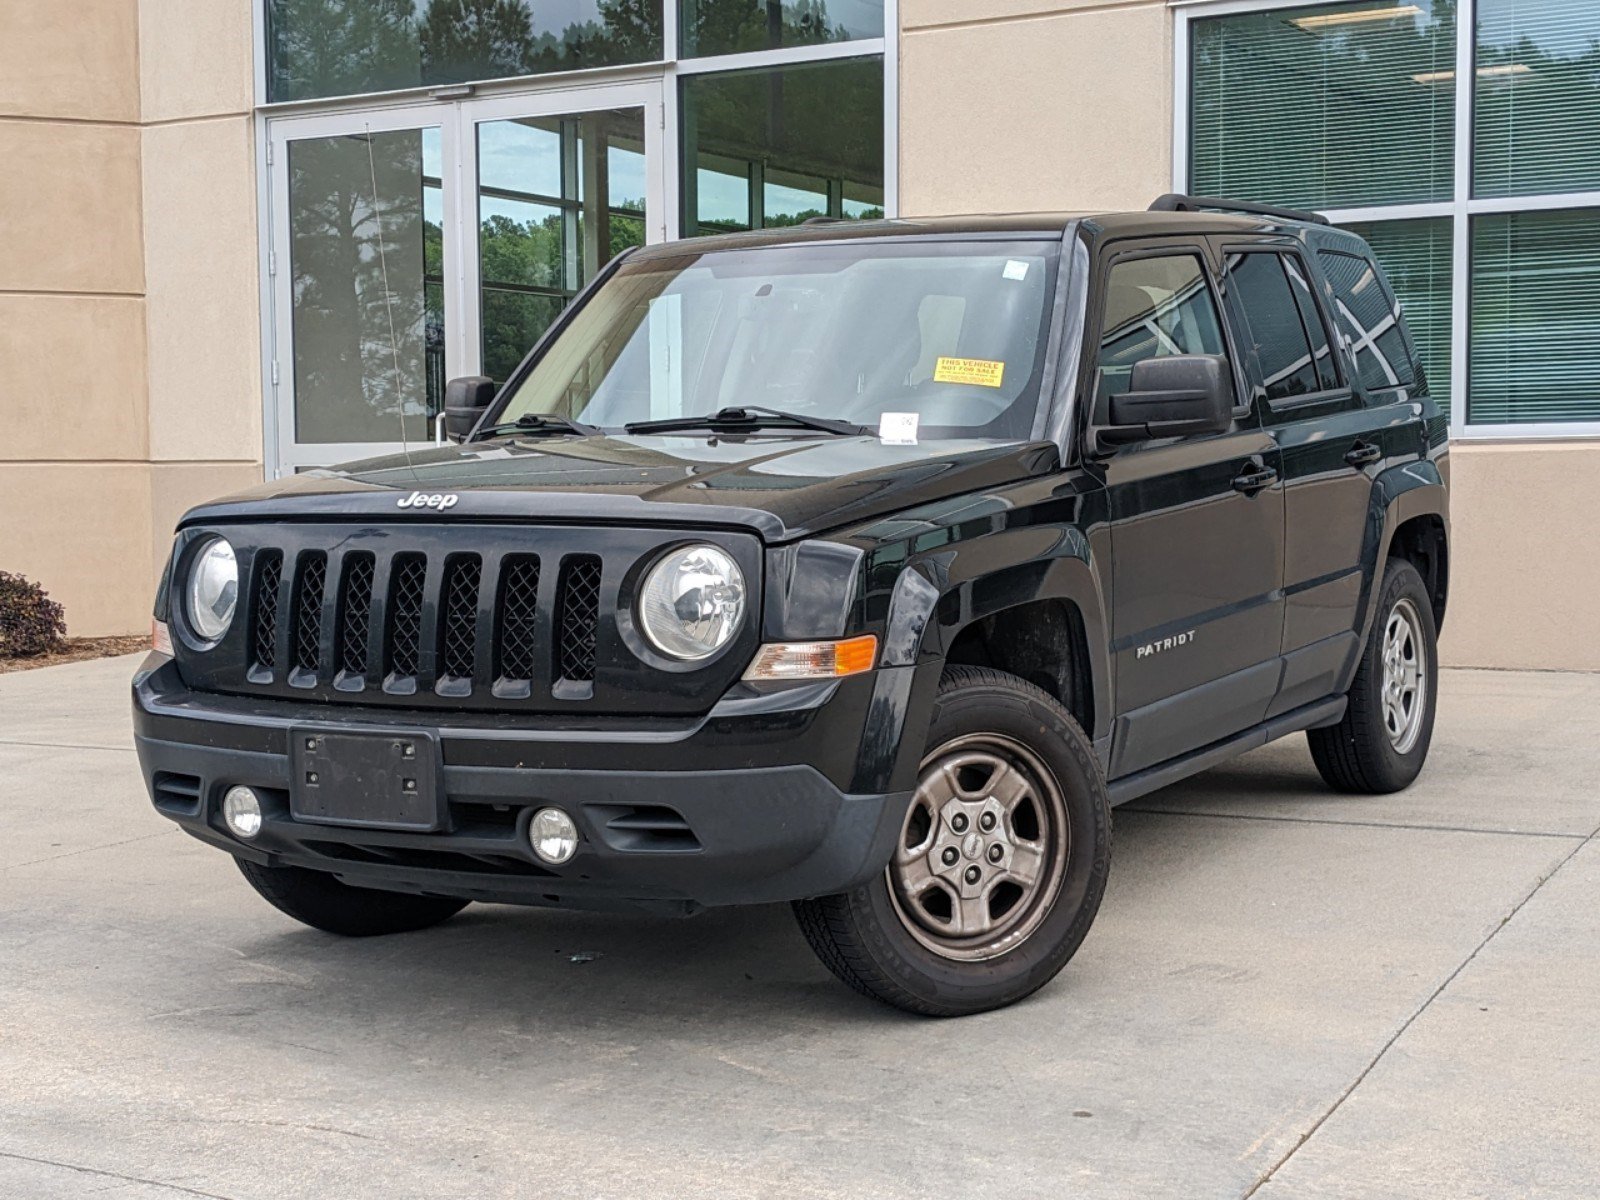 Pre-Owned 2016 Jeep Patriot Sport Sport Utility in Smithfield #GD659806 |  Classic Ford of Smithfield